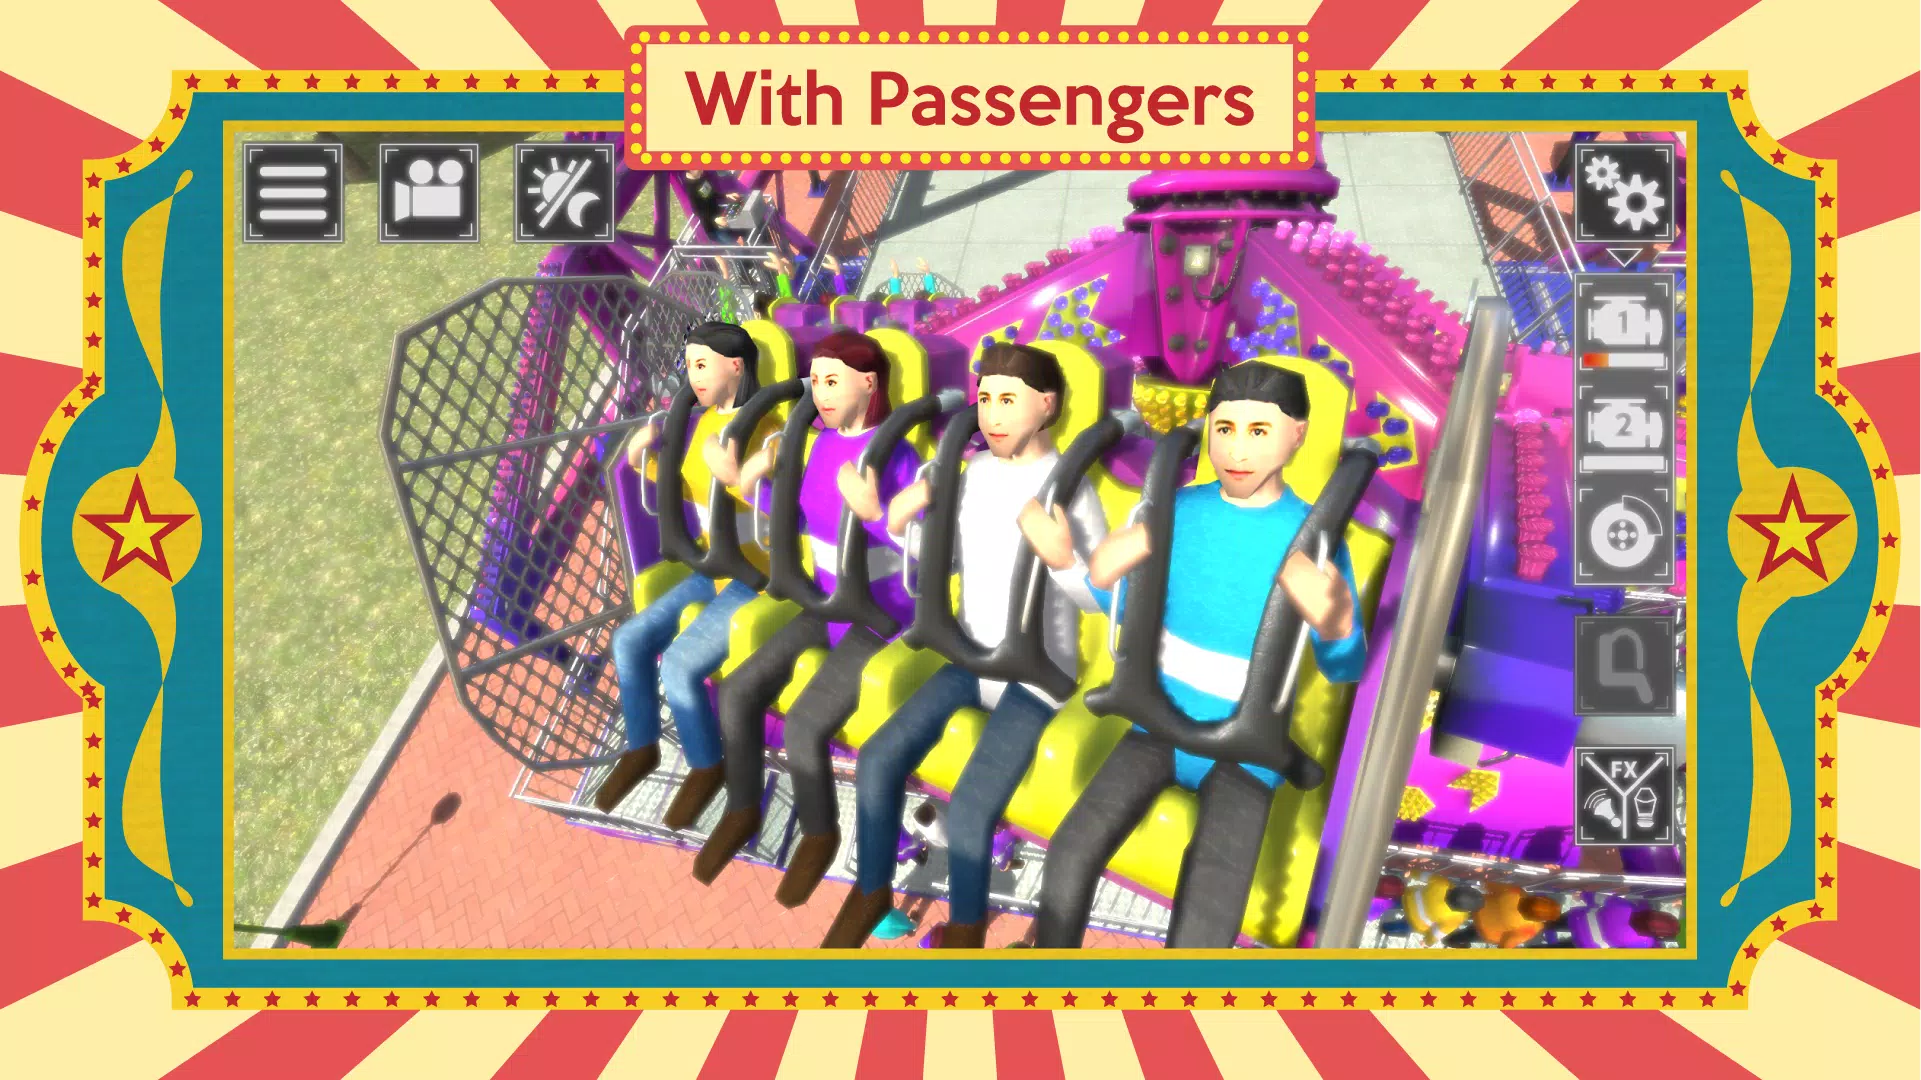 Inverter : Theme Park Simulator Latest Version 2.4 for Android